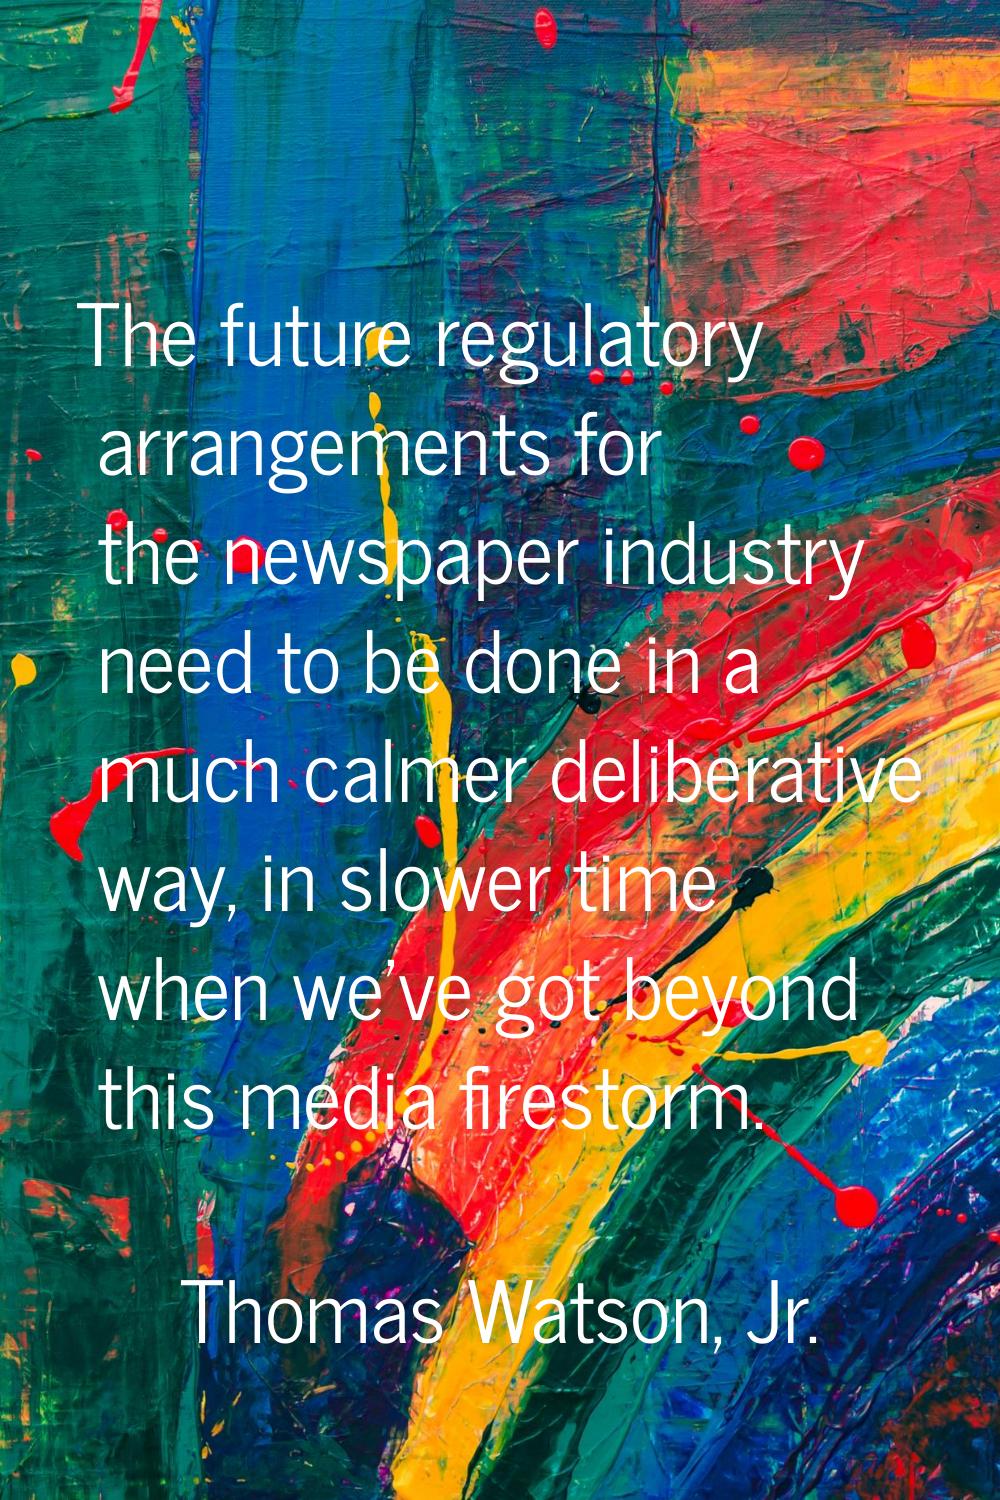 The future regulatory arrangements for the newspaper industry need to be done in a much calmer deli